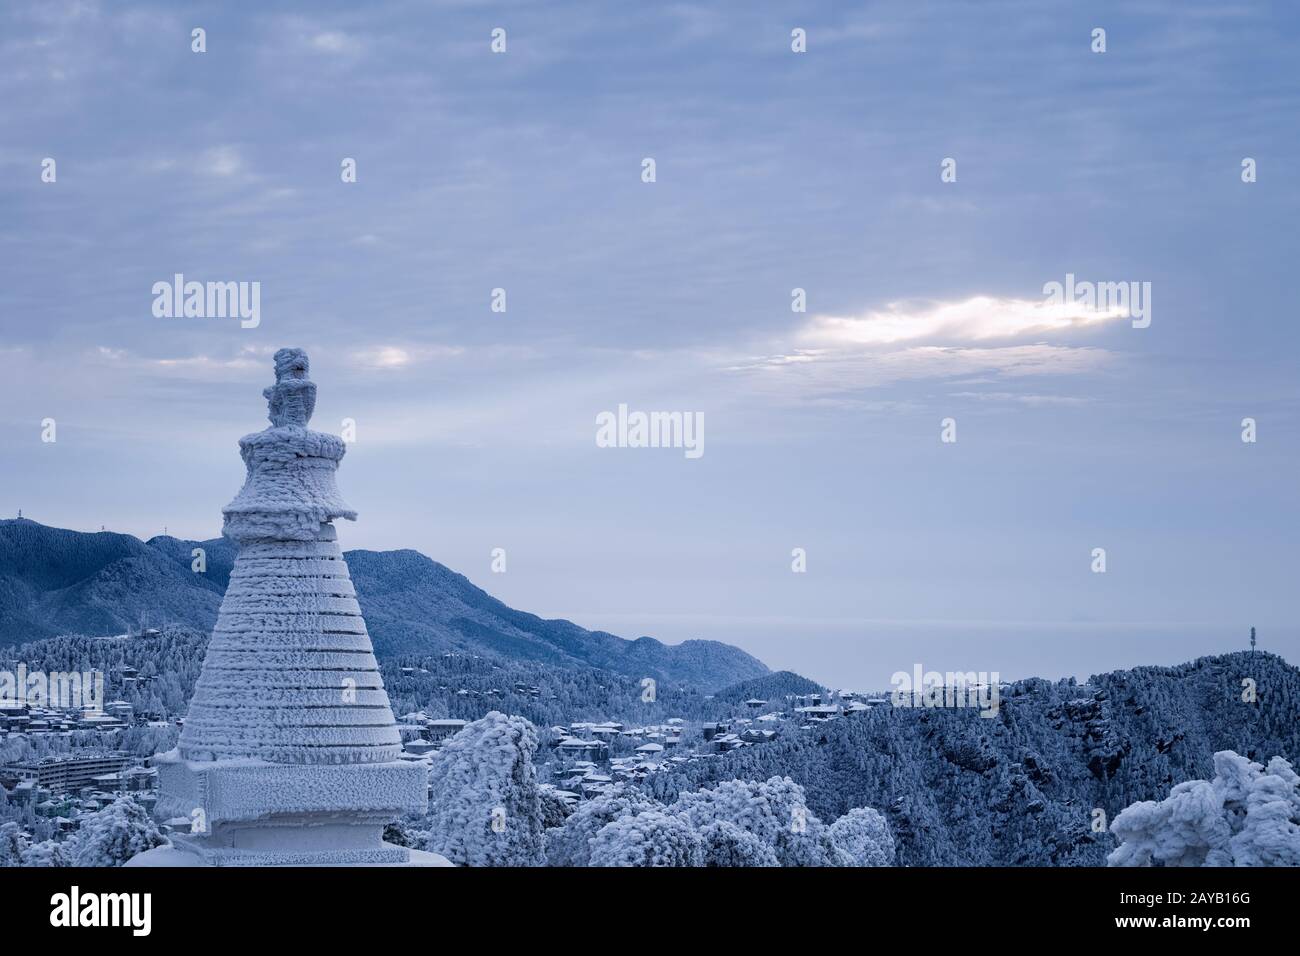 lushan mountain landscape in winter Stock Photo